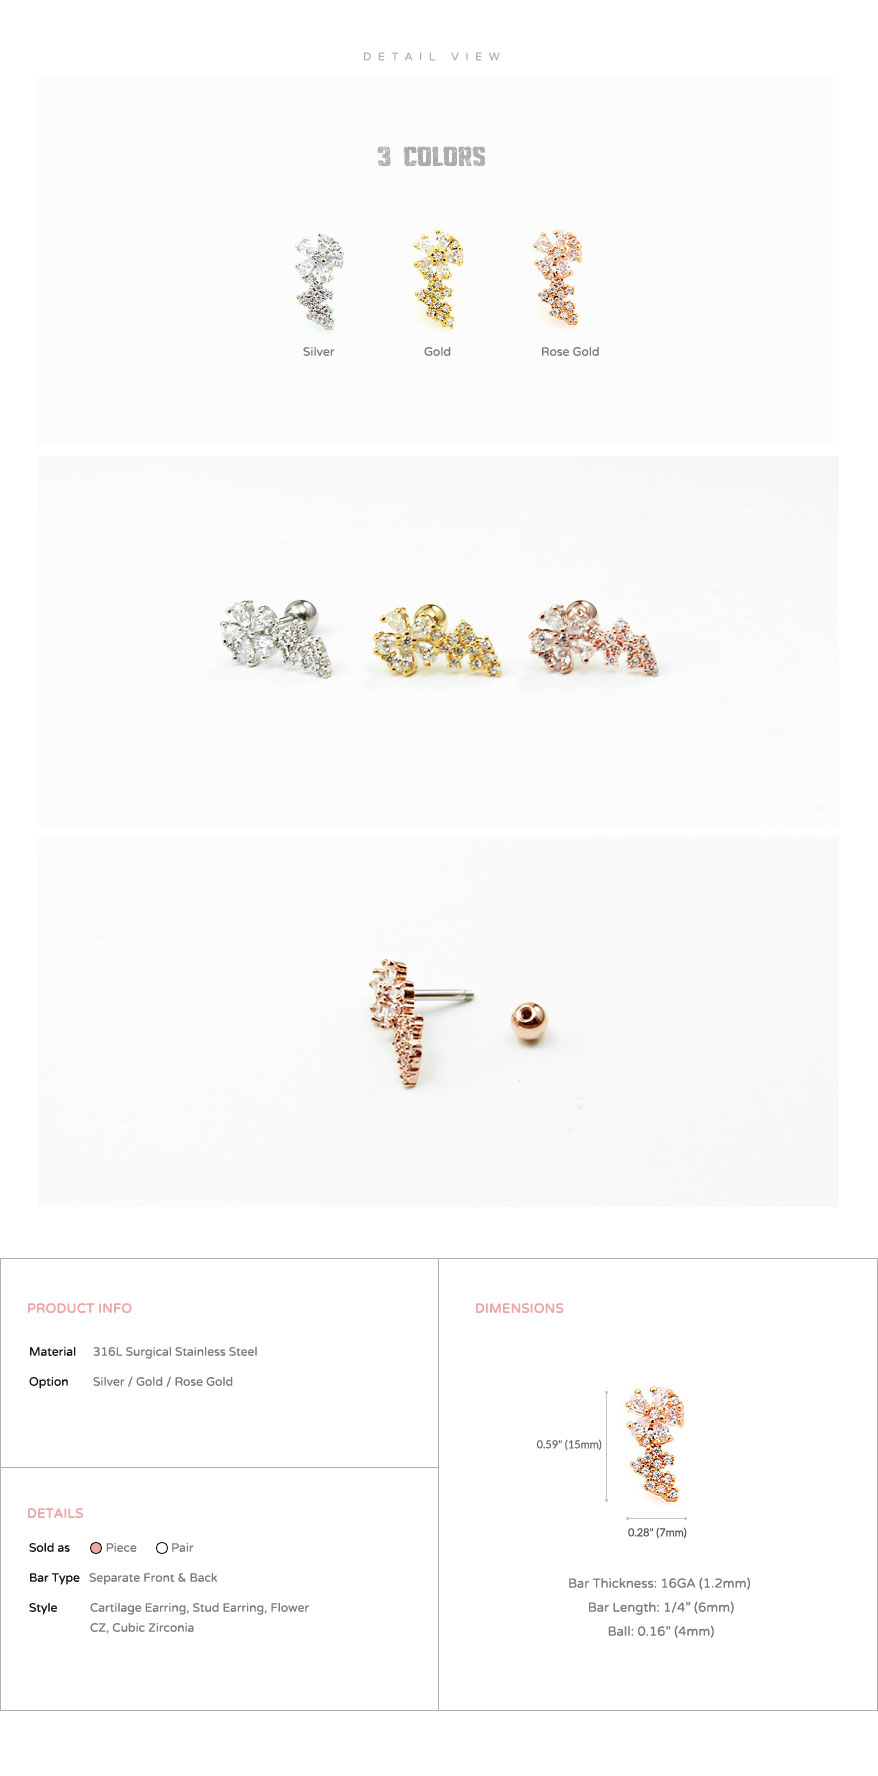 ear_studs_piercing_cartilage_earrings_16g_316l_surgical_stainless_steel_korean_asian_style_jewelry_barbell_rose_gold_helix_conch_flower_5